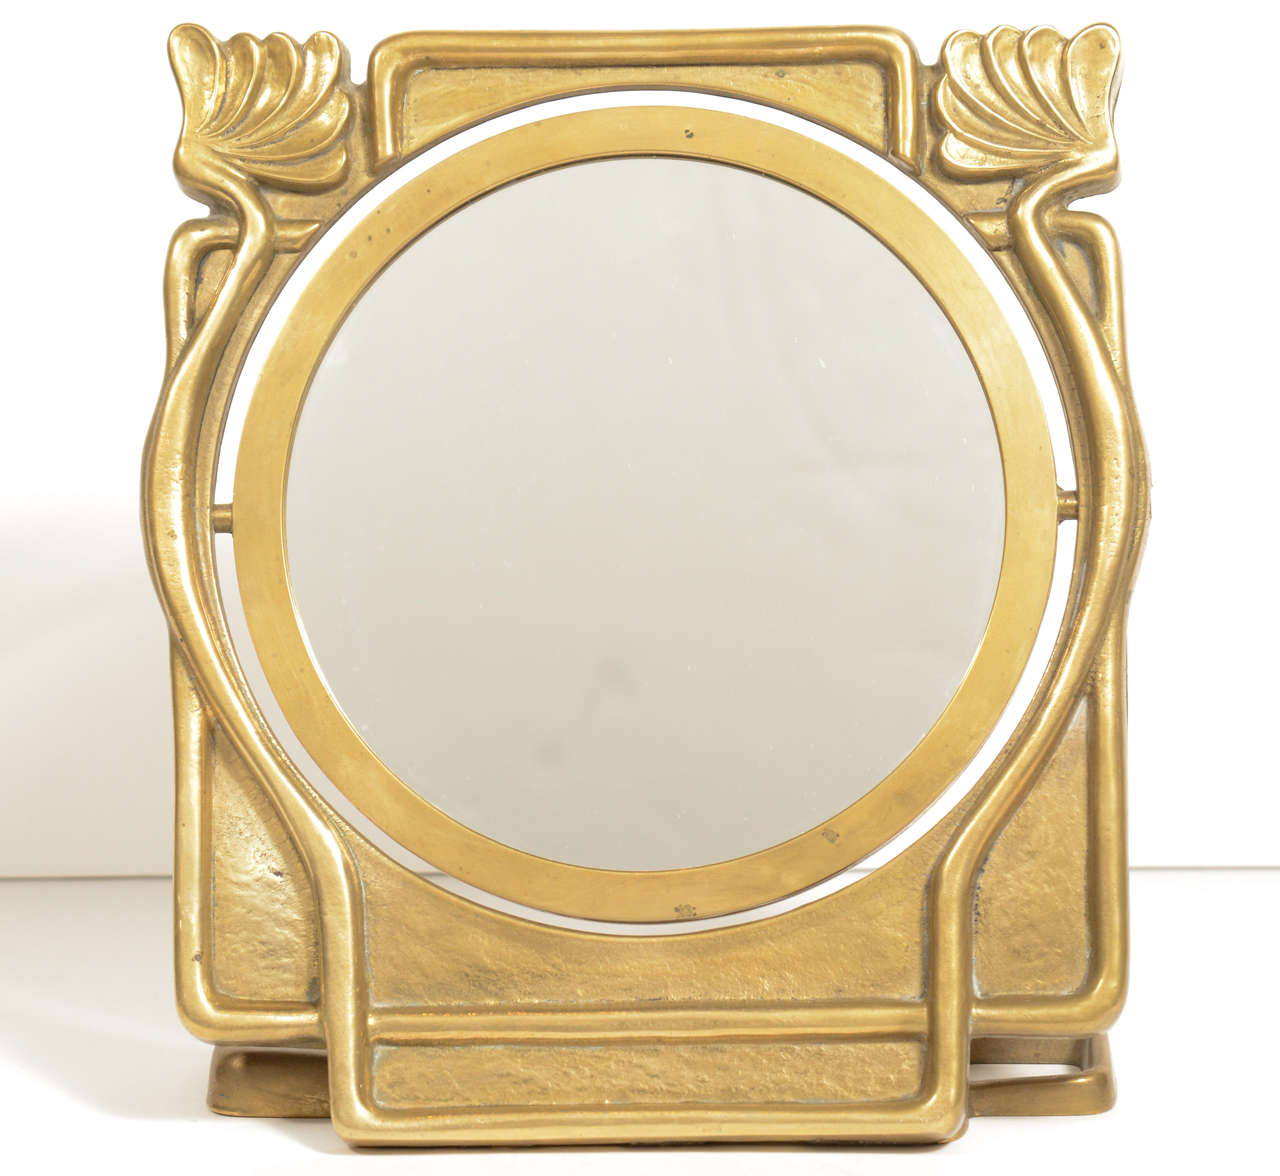 Outstanding Art Nouveau vanity top mirror made of hand cast bronze. Highly stylized modern and streamline design with floral stem details depictive of the Era. The center features a revolving mirror (mirrored on both sides).
